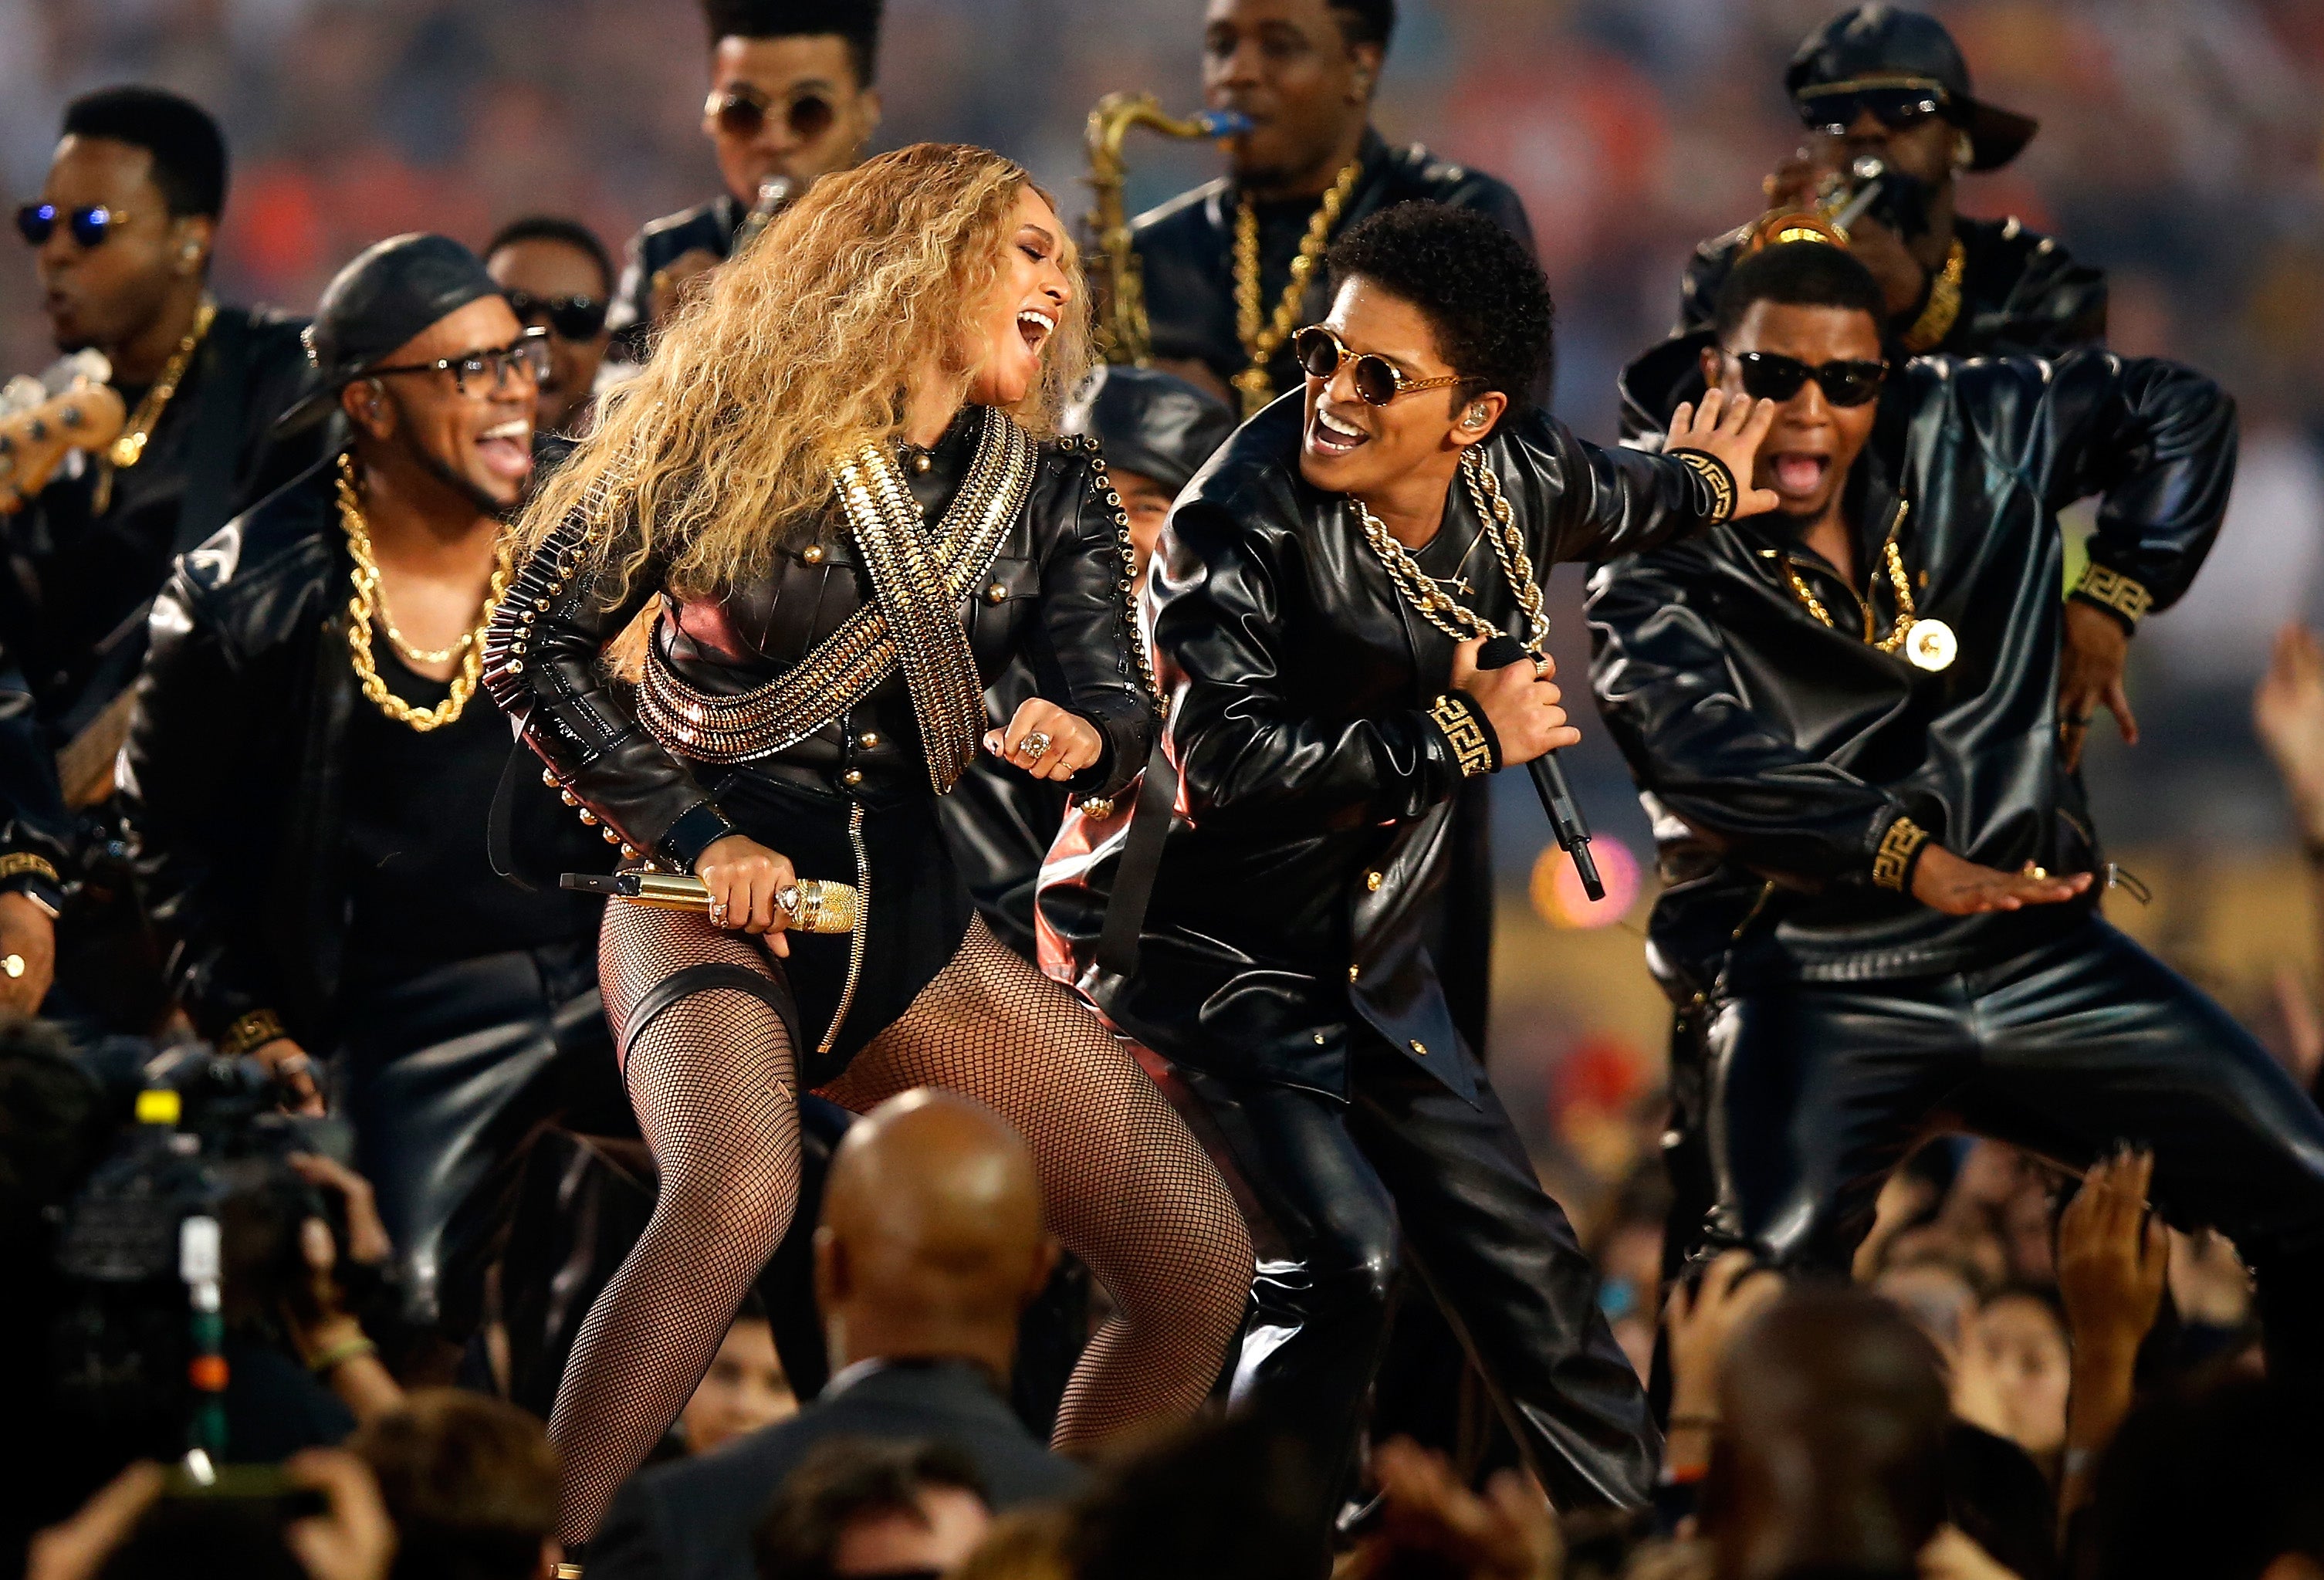 Beyoncé and Bruno Mars are special guests at Coldplay’s 2016 halftime show